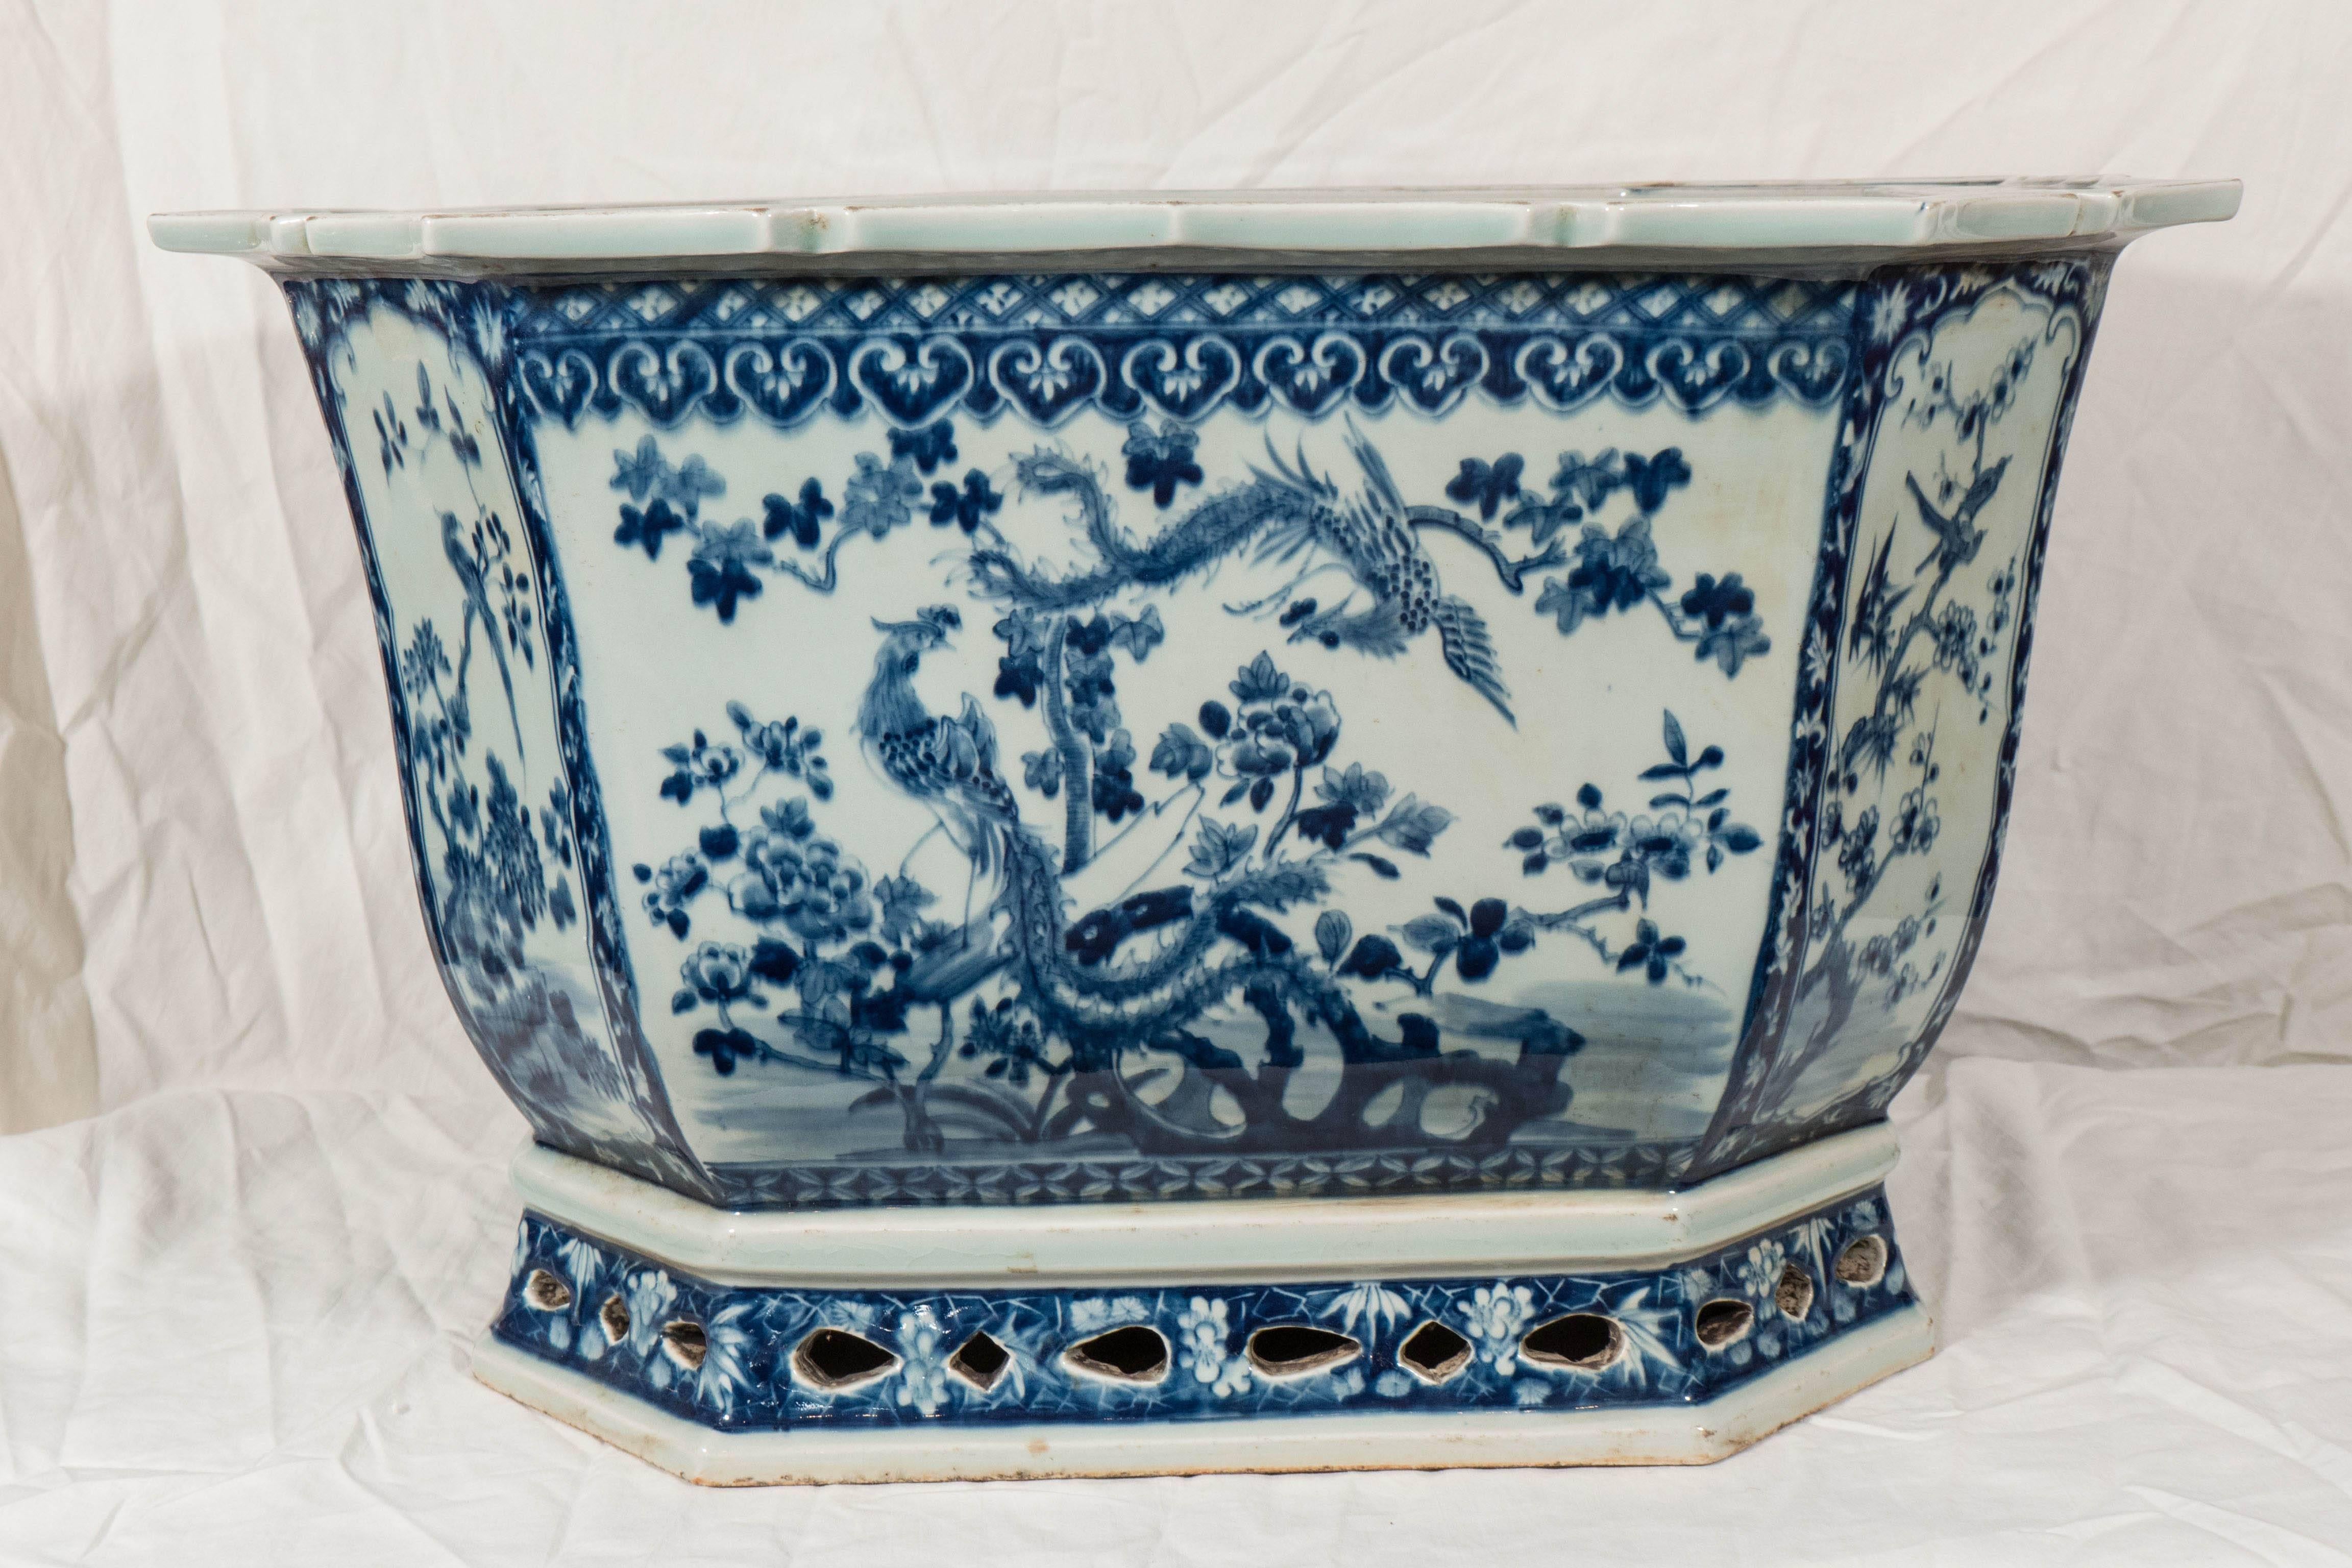 A large Chinese porcelain jardiniere painted with a floral motif in underglaze blue and white. Beautifully decorated with hand-painted panels on the front and back showing long tailed birds in a garden of flowering peonies. This cache pot has two